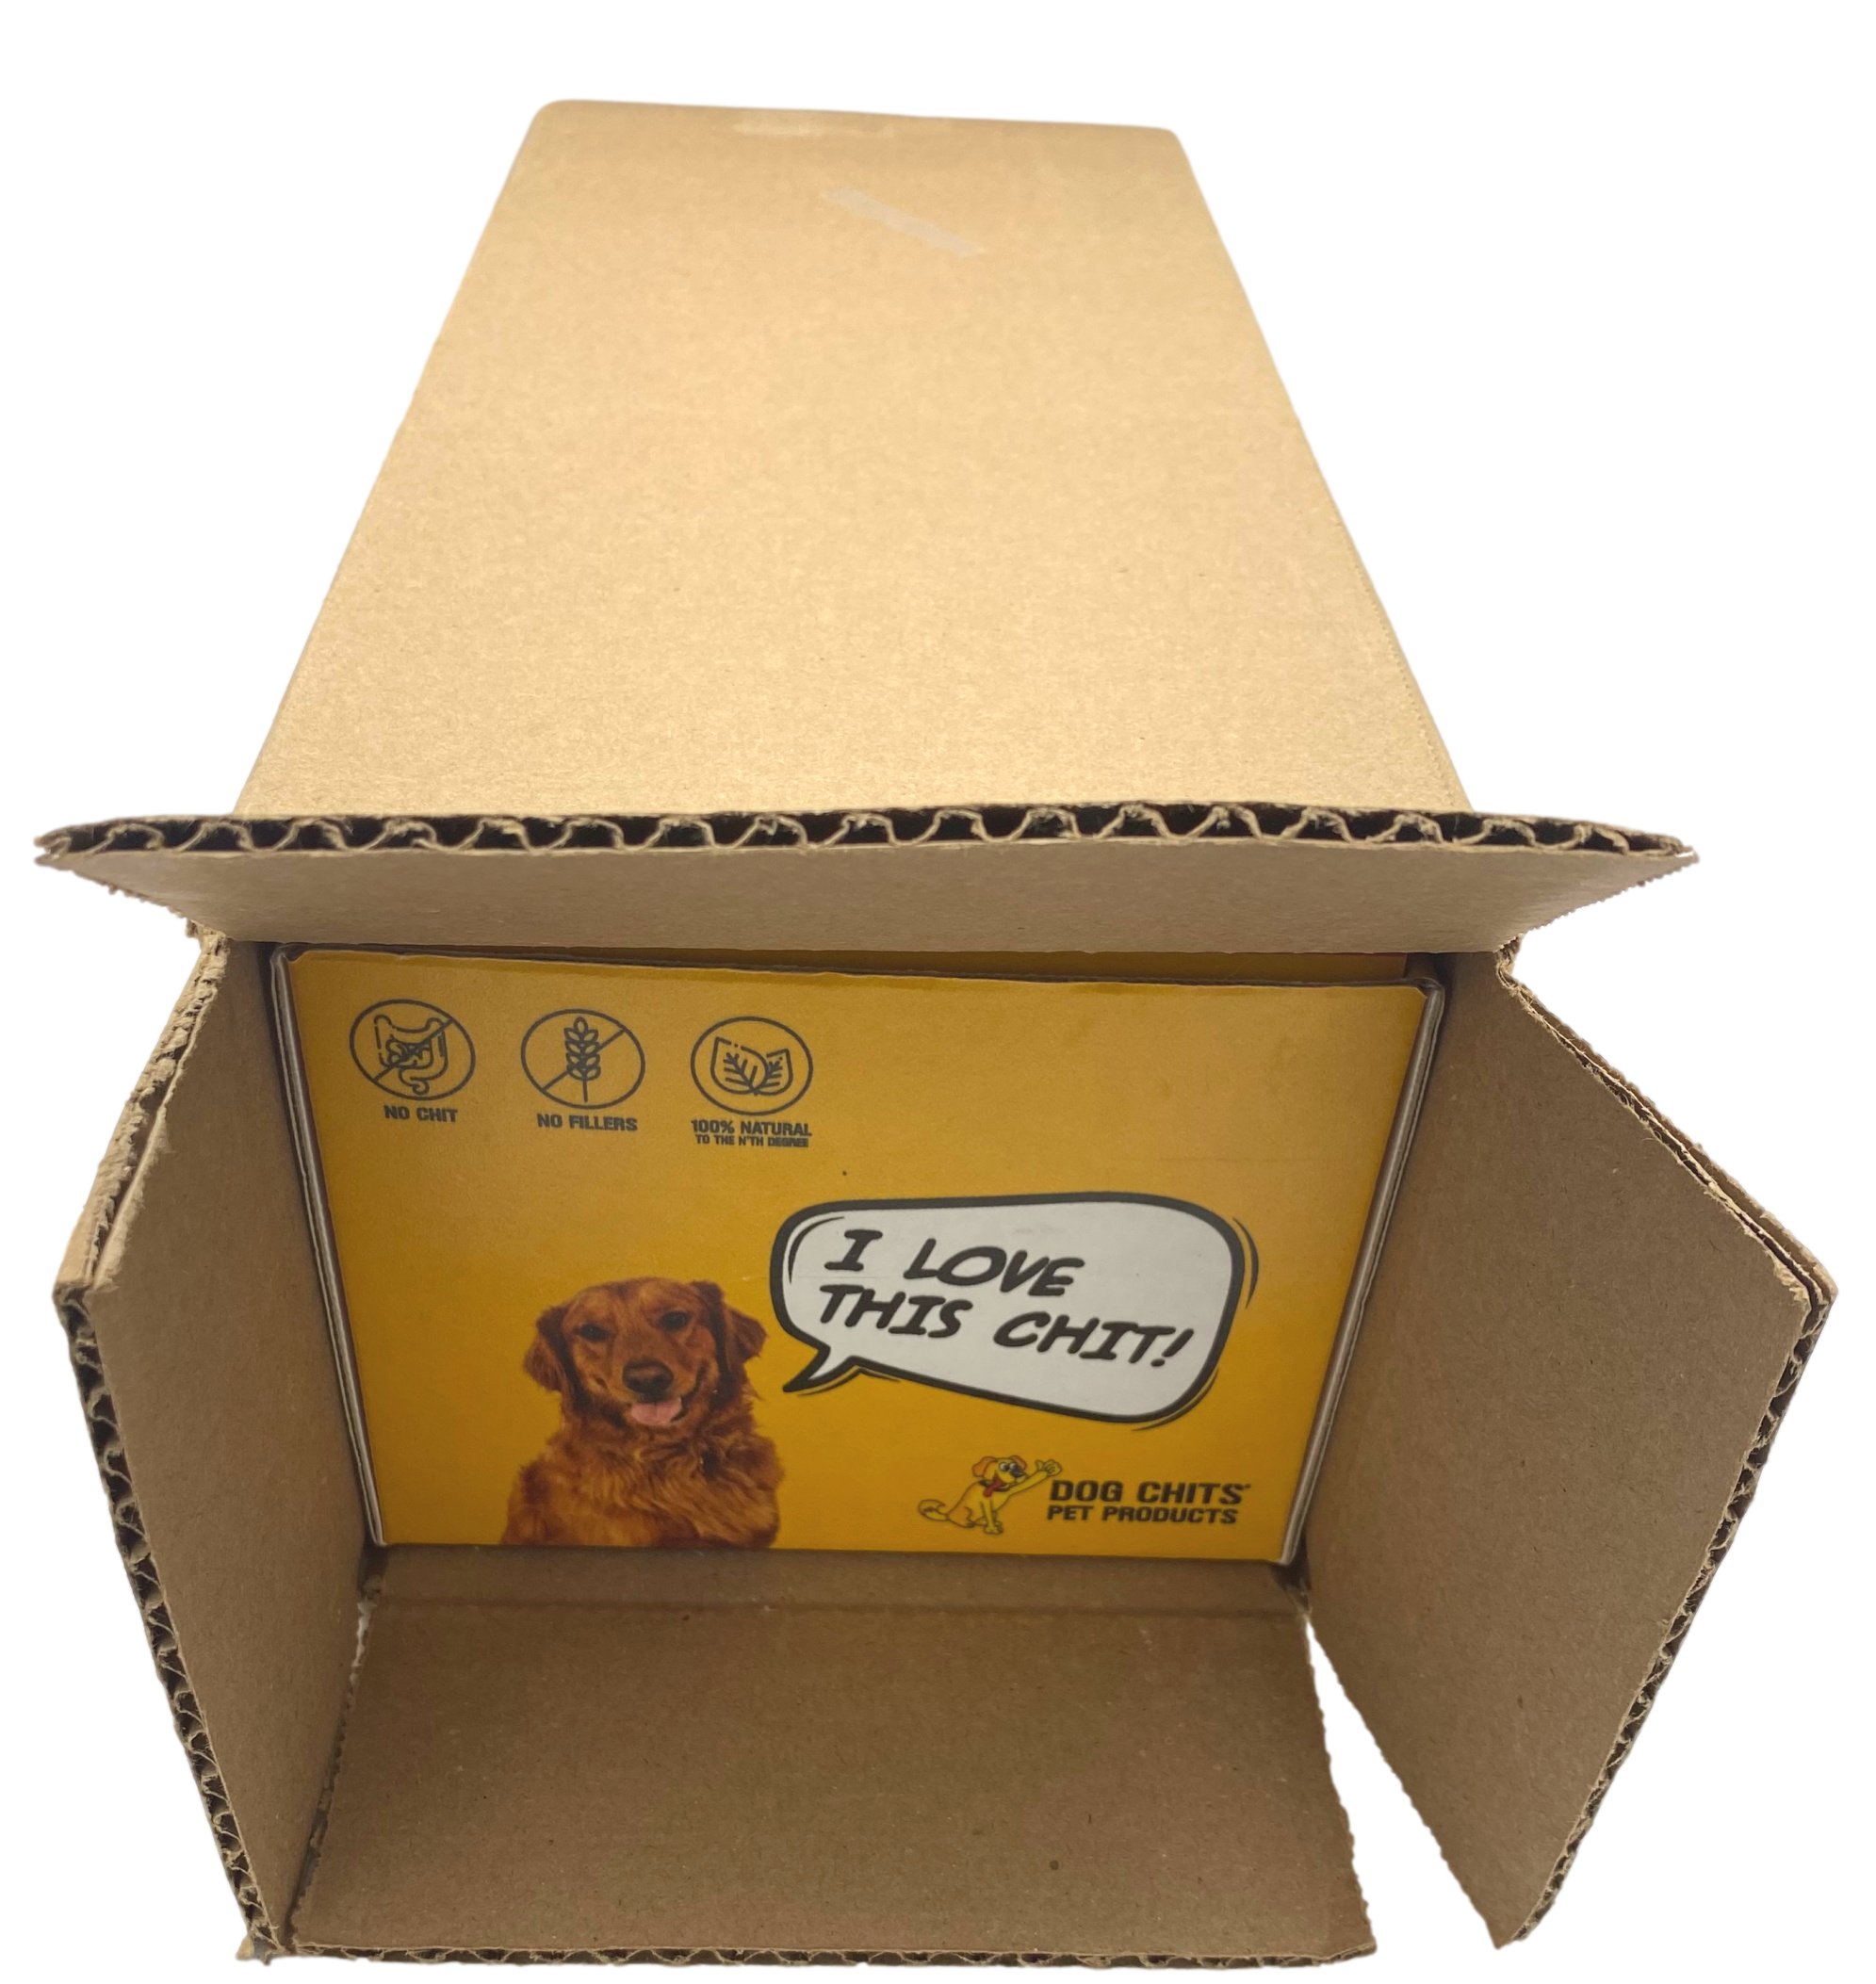 Bully Sticks, 6" 50 Pack, Open Top Bin Box (WHOLESALE ONLY)